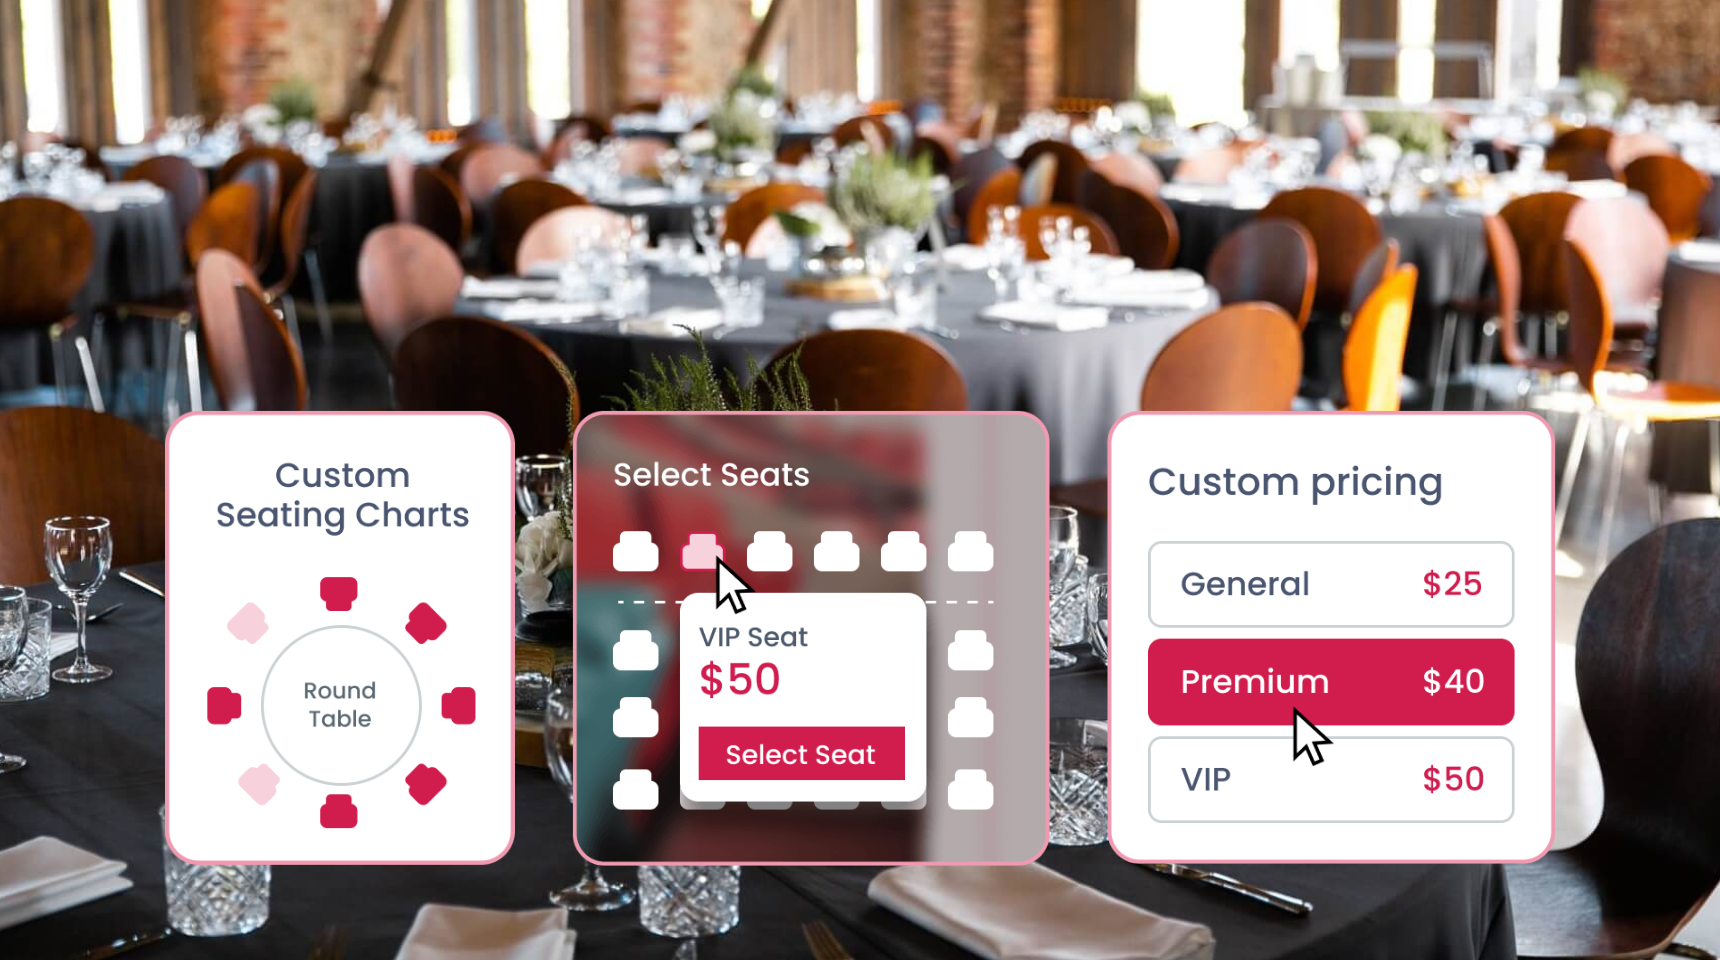 Image of a gala dinner with round tables, along with diagram of interactive seat selection.